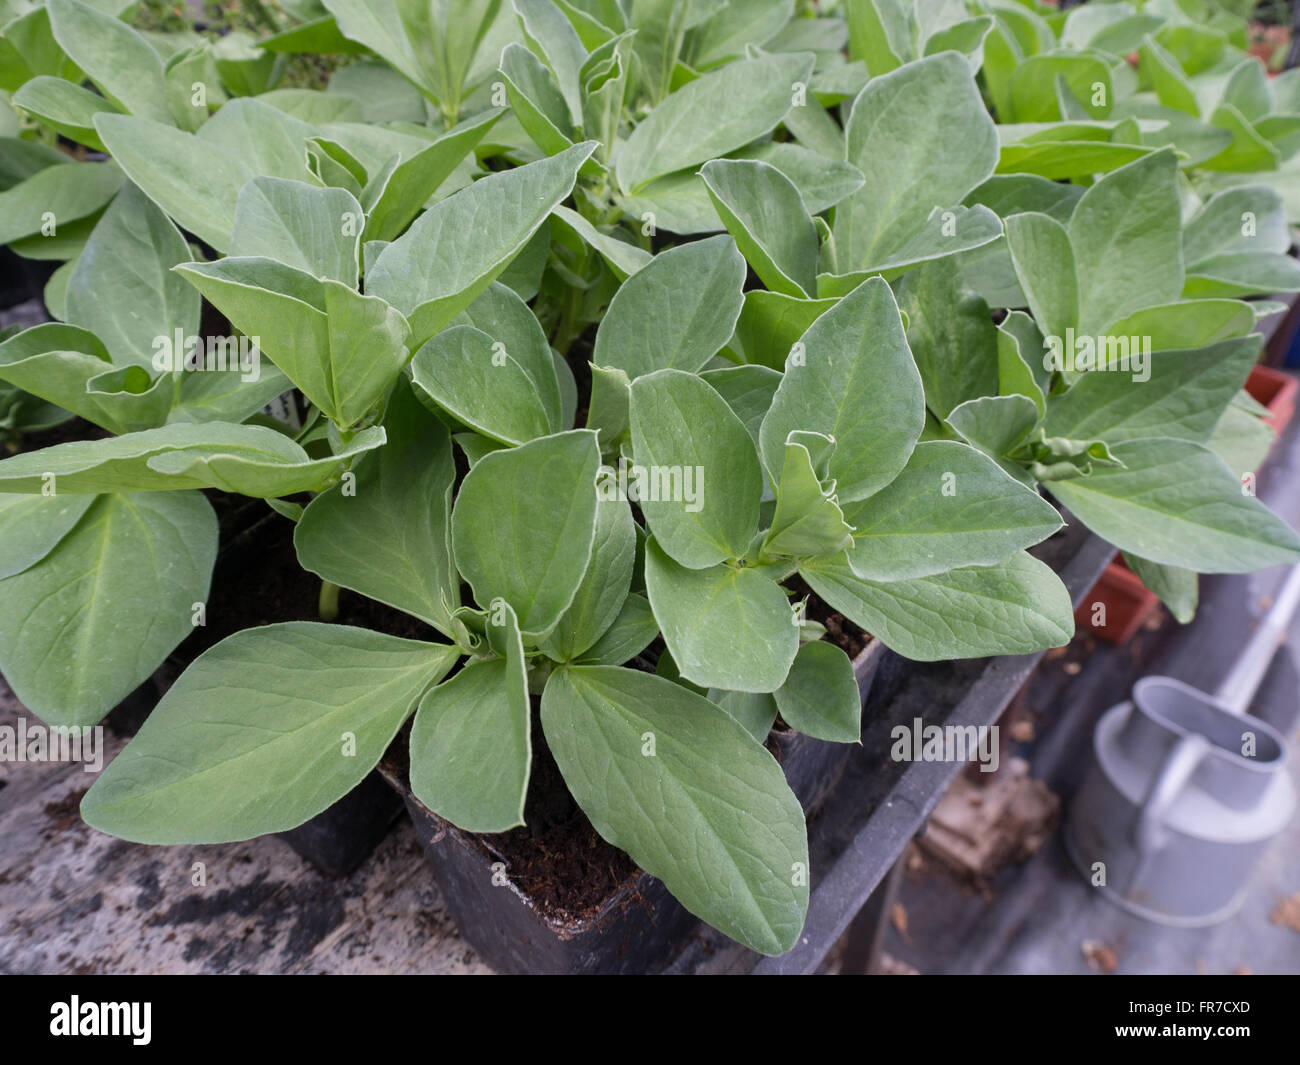 Broad bean seedlings ready for planting out Stock Photo